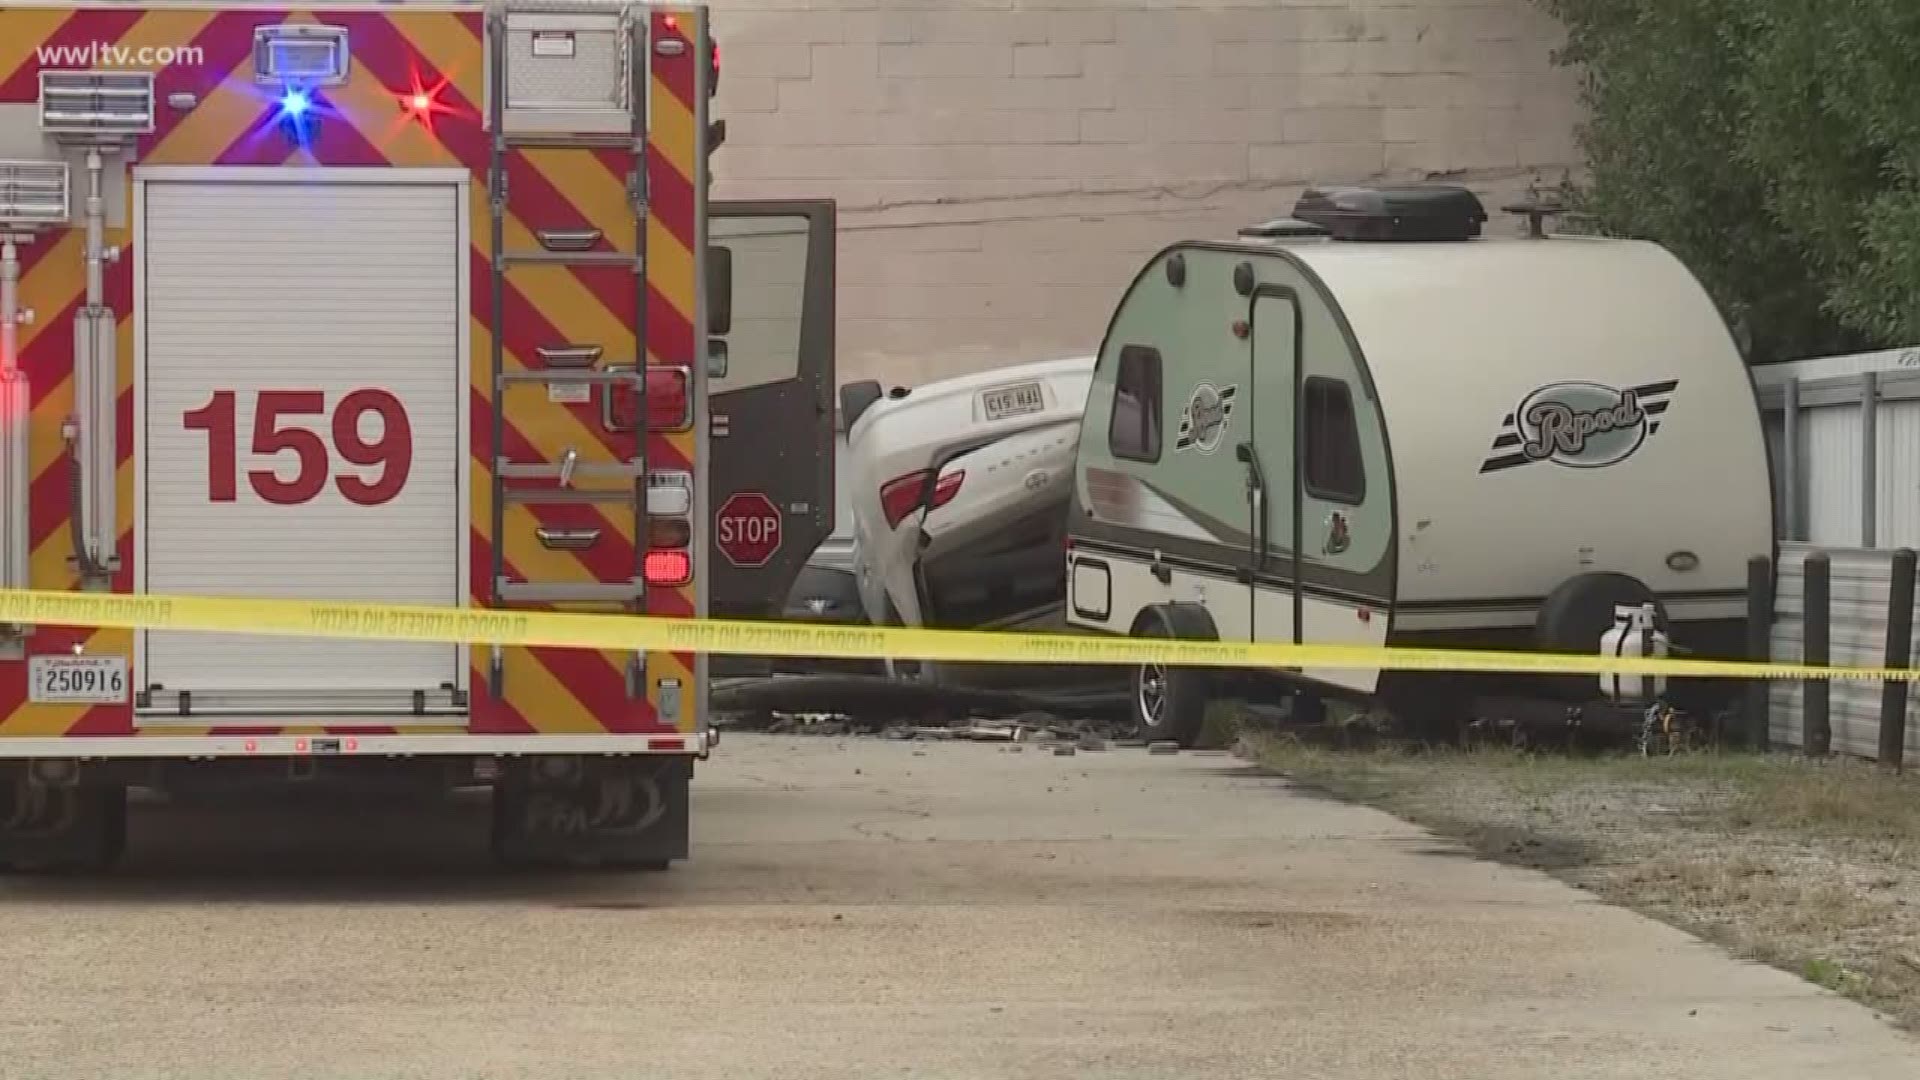 Officials are still unsure how the car went off the side of the two-story parking garage in Metairie